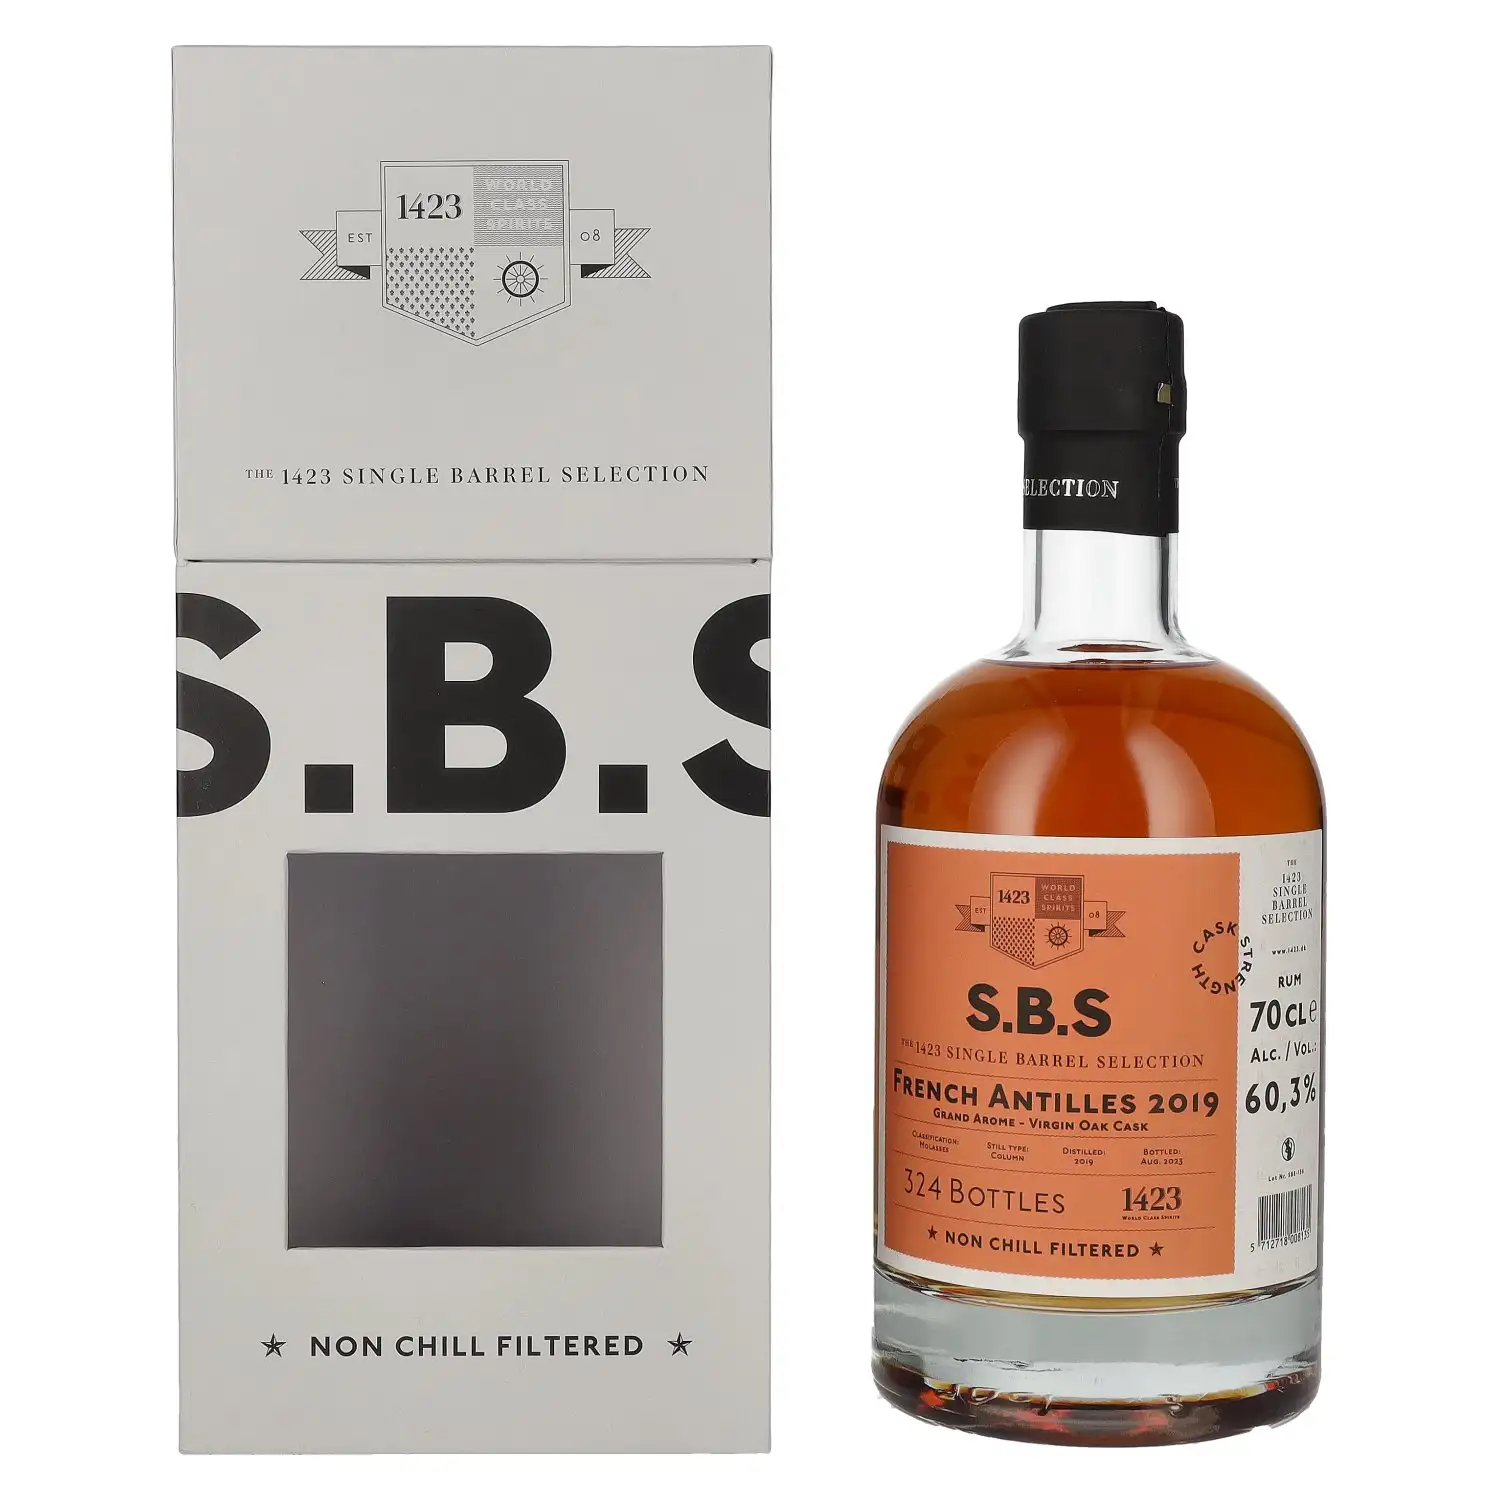 Image of the front of the bottle of the rum S.B.S French Antilles